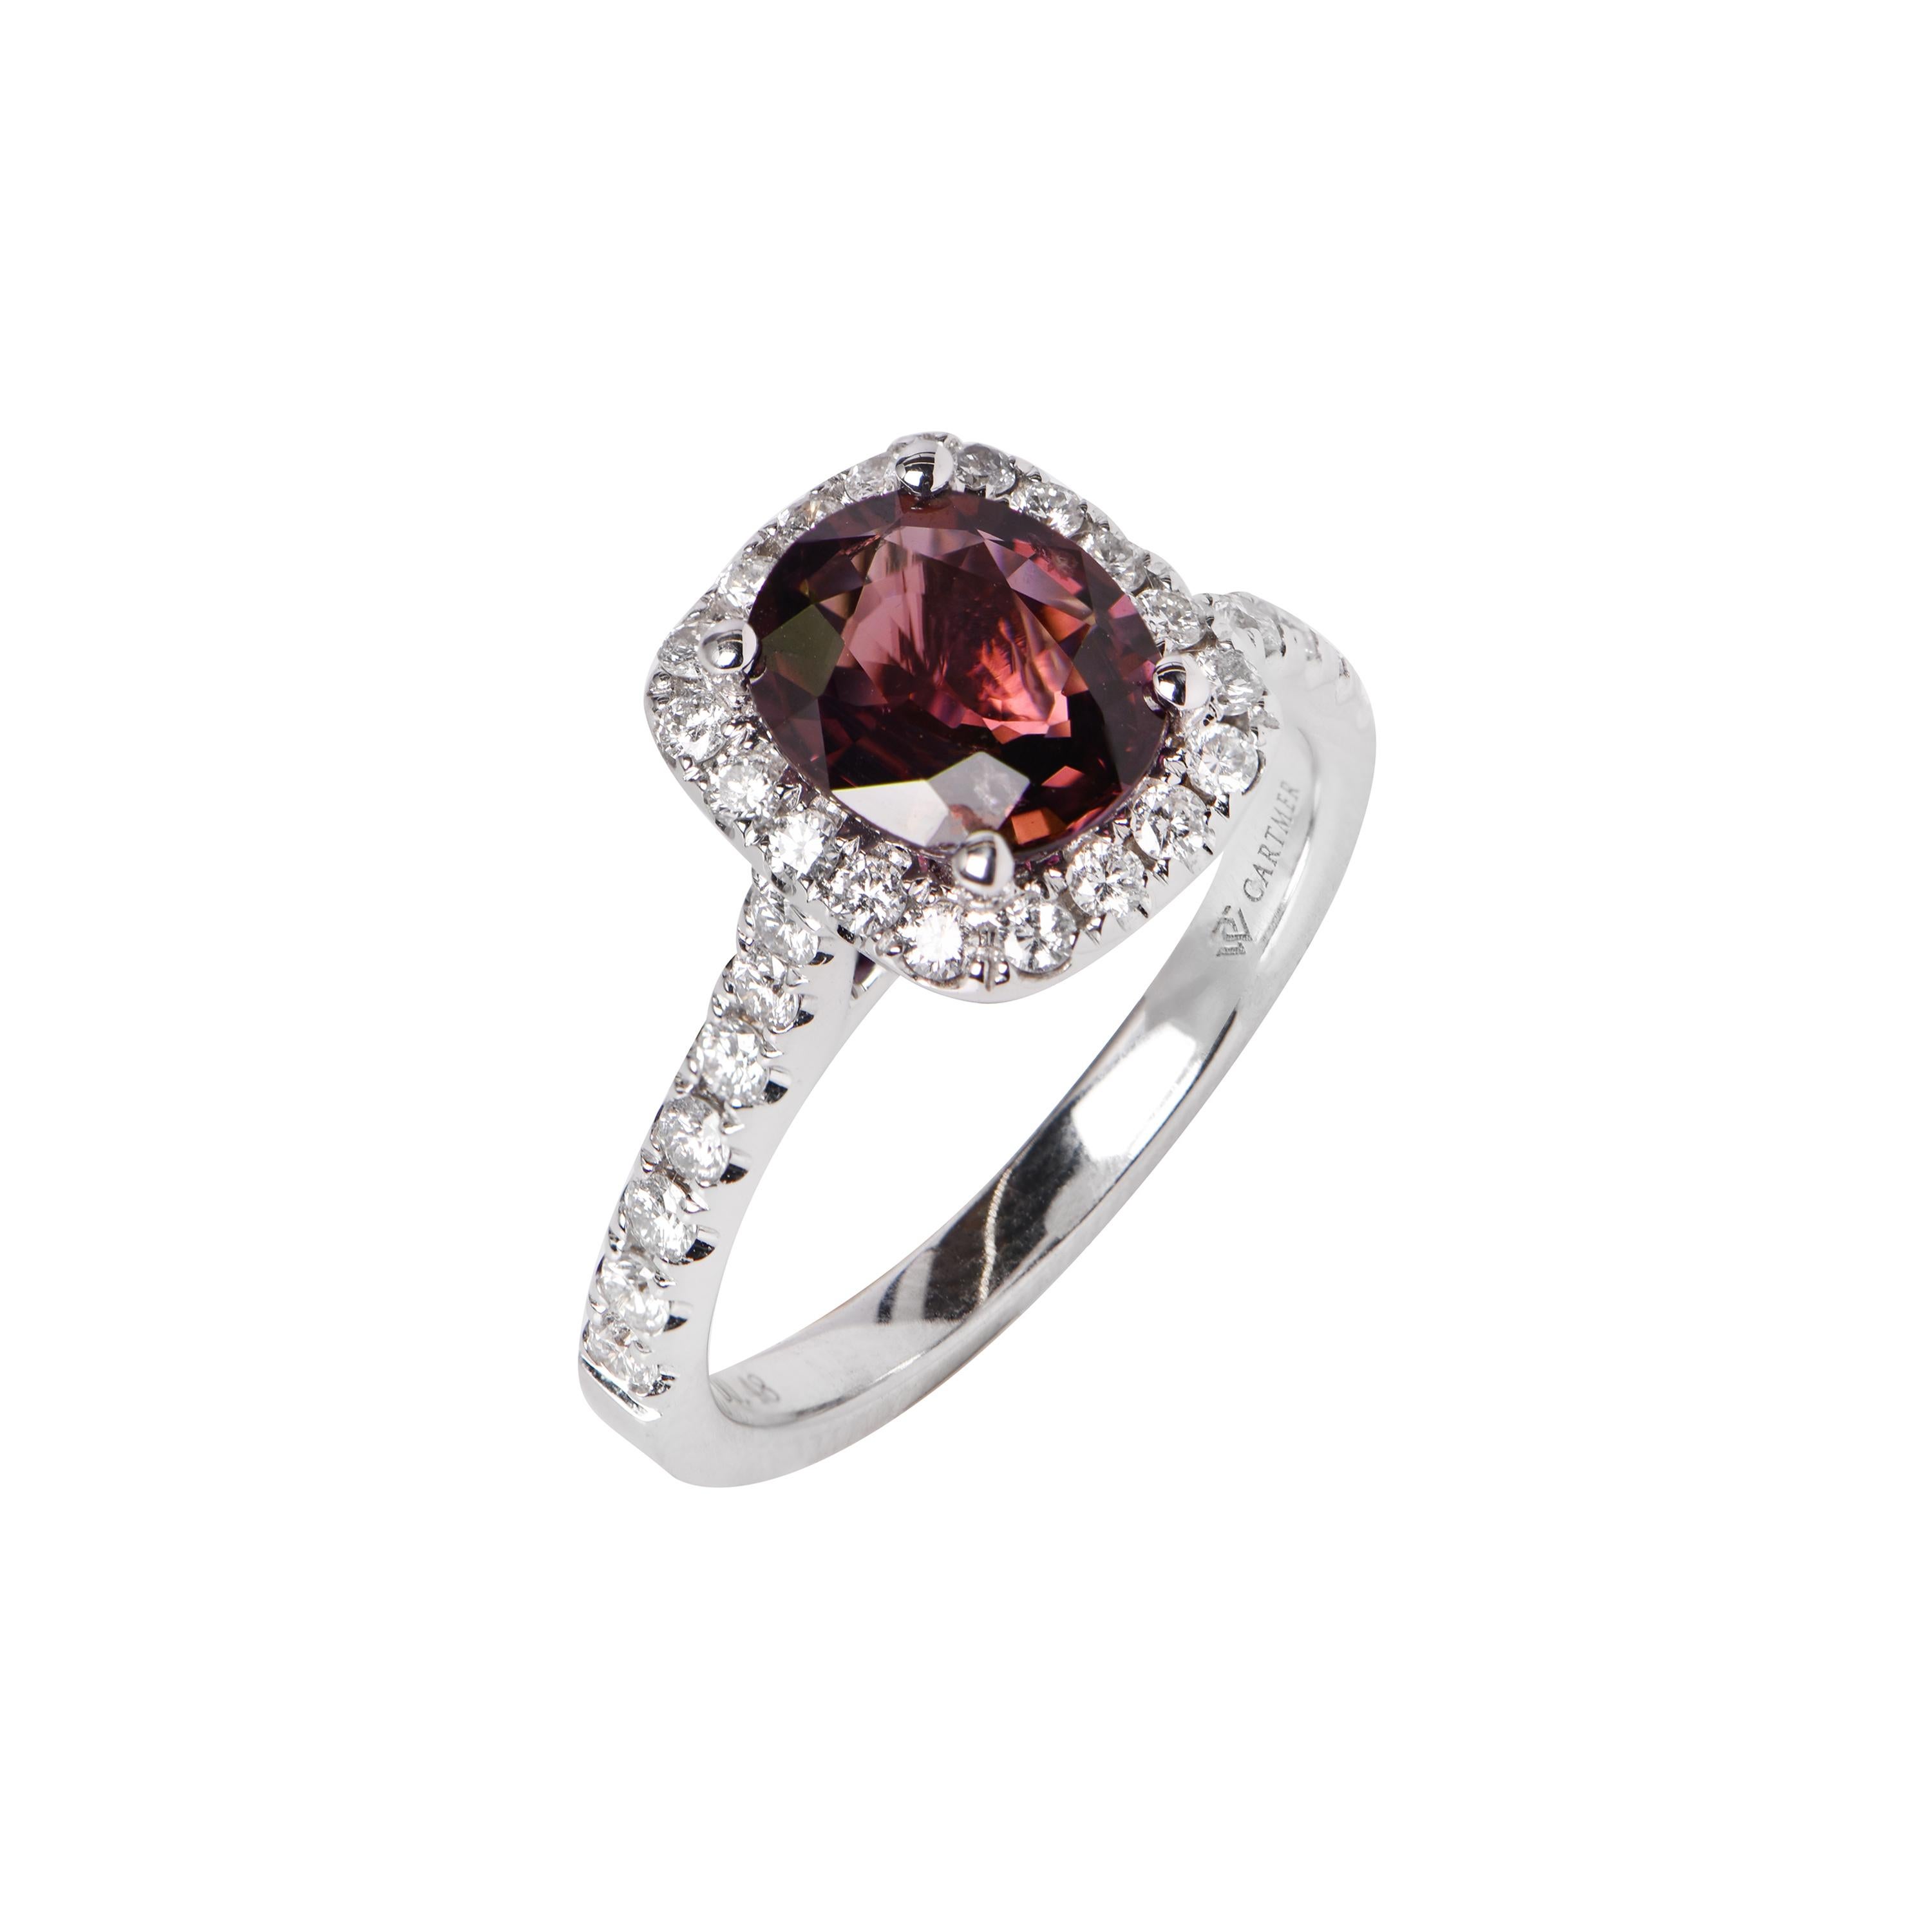 An 18ct White Gold ring showcasing a Purplish Red Natural Unheated Ruby (1.77ct) surrounded by a Halo of 32 Diamonds, totalling 0.48ct. This ring comes with a valuation certificate. Item No. 1333057.